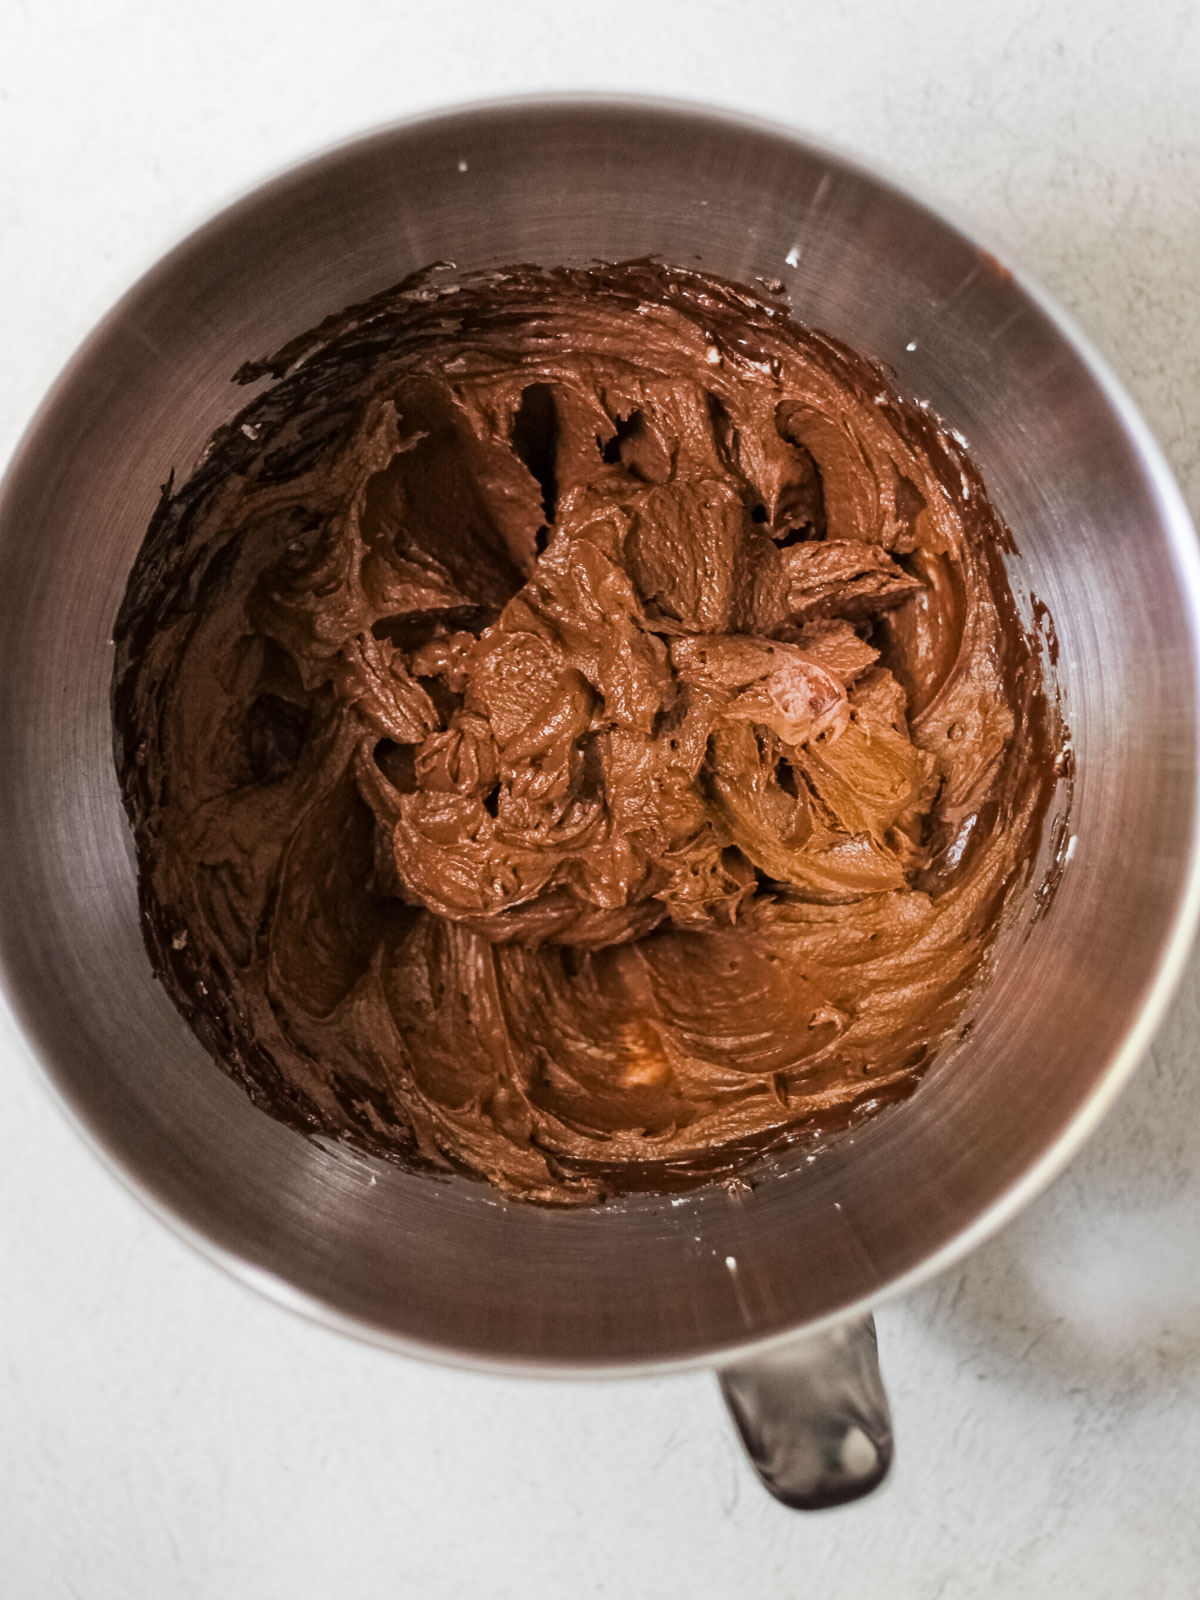 Mixing bowl filled with chocolate ganache.